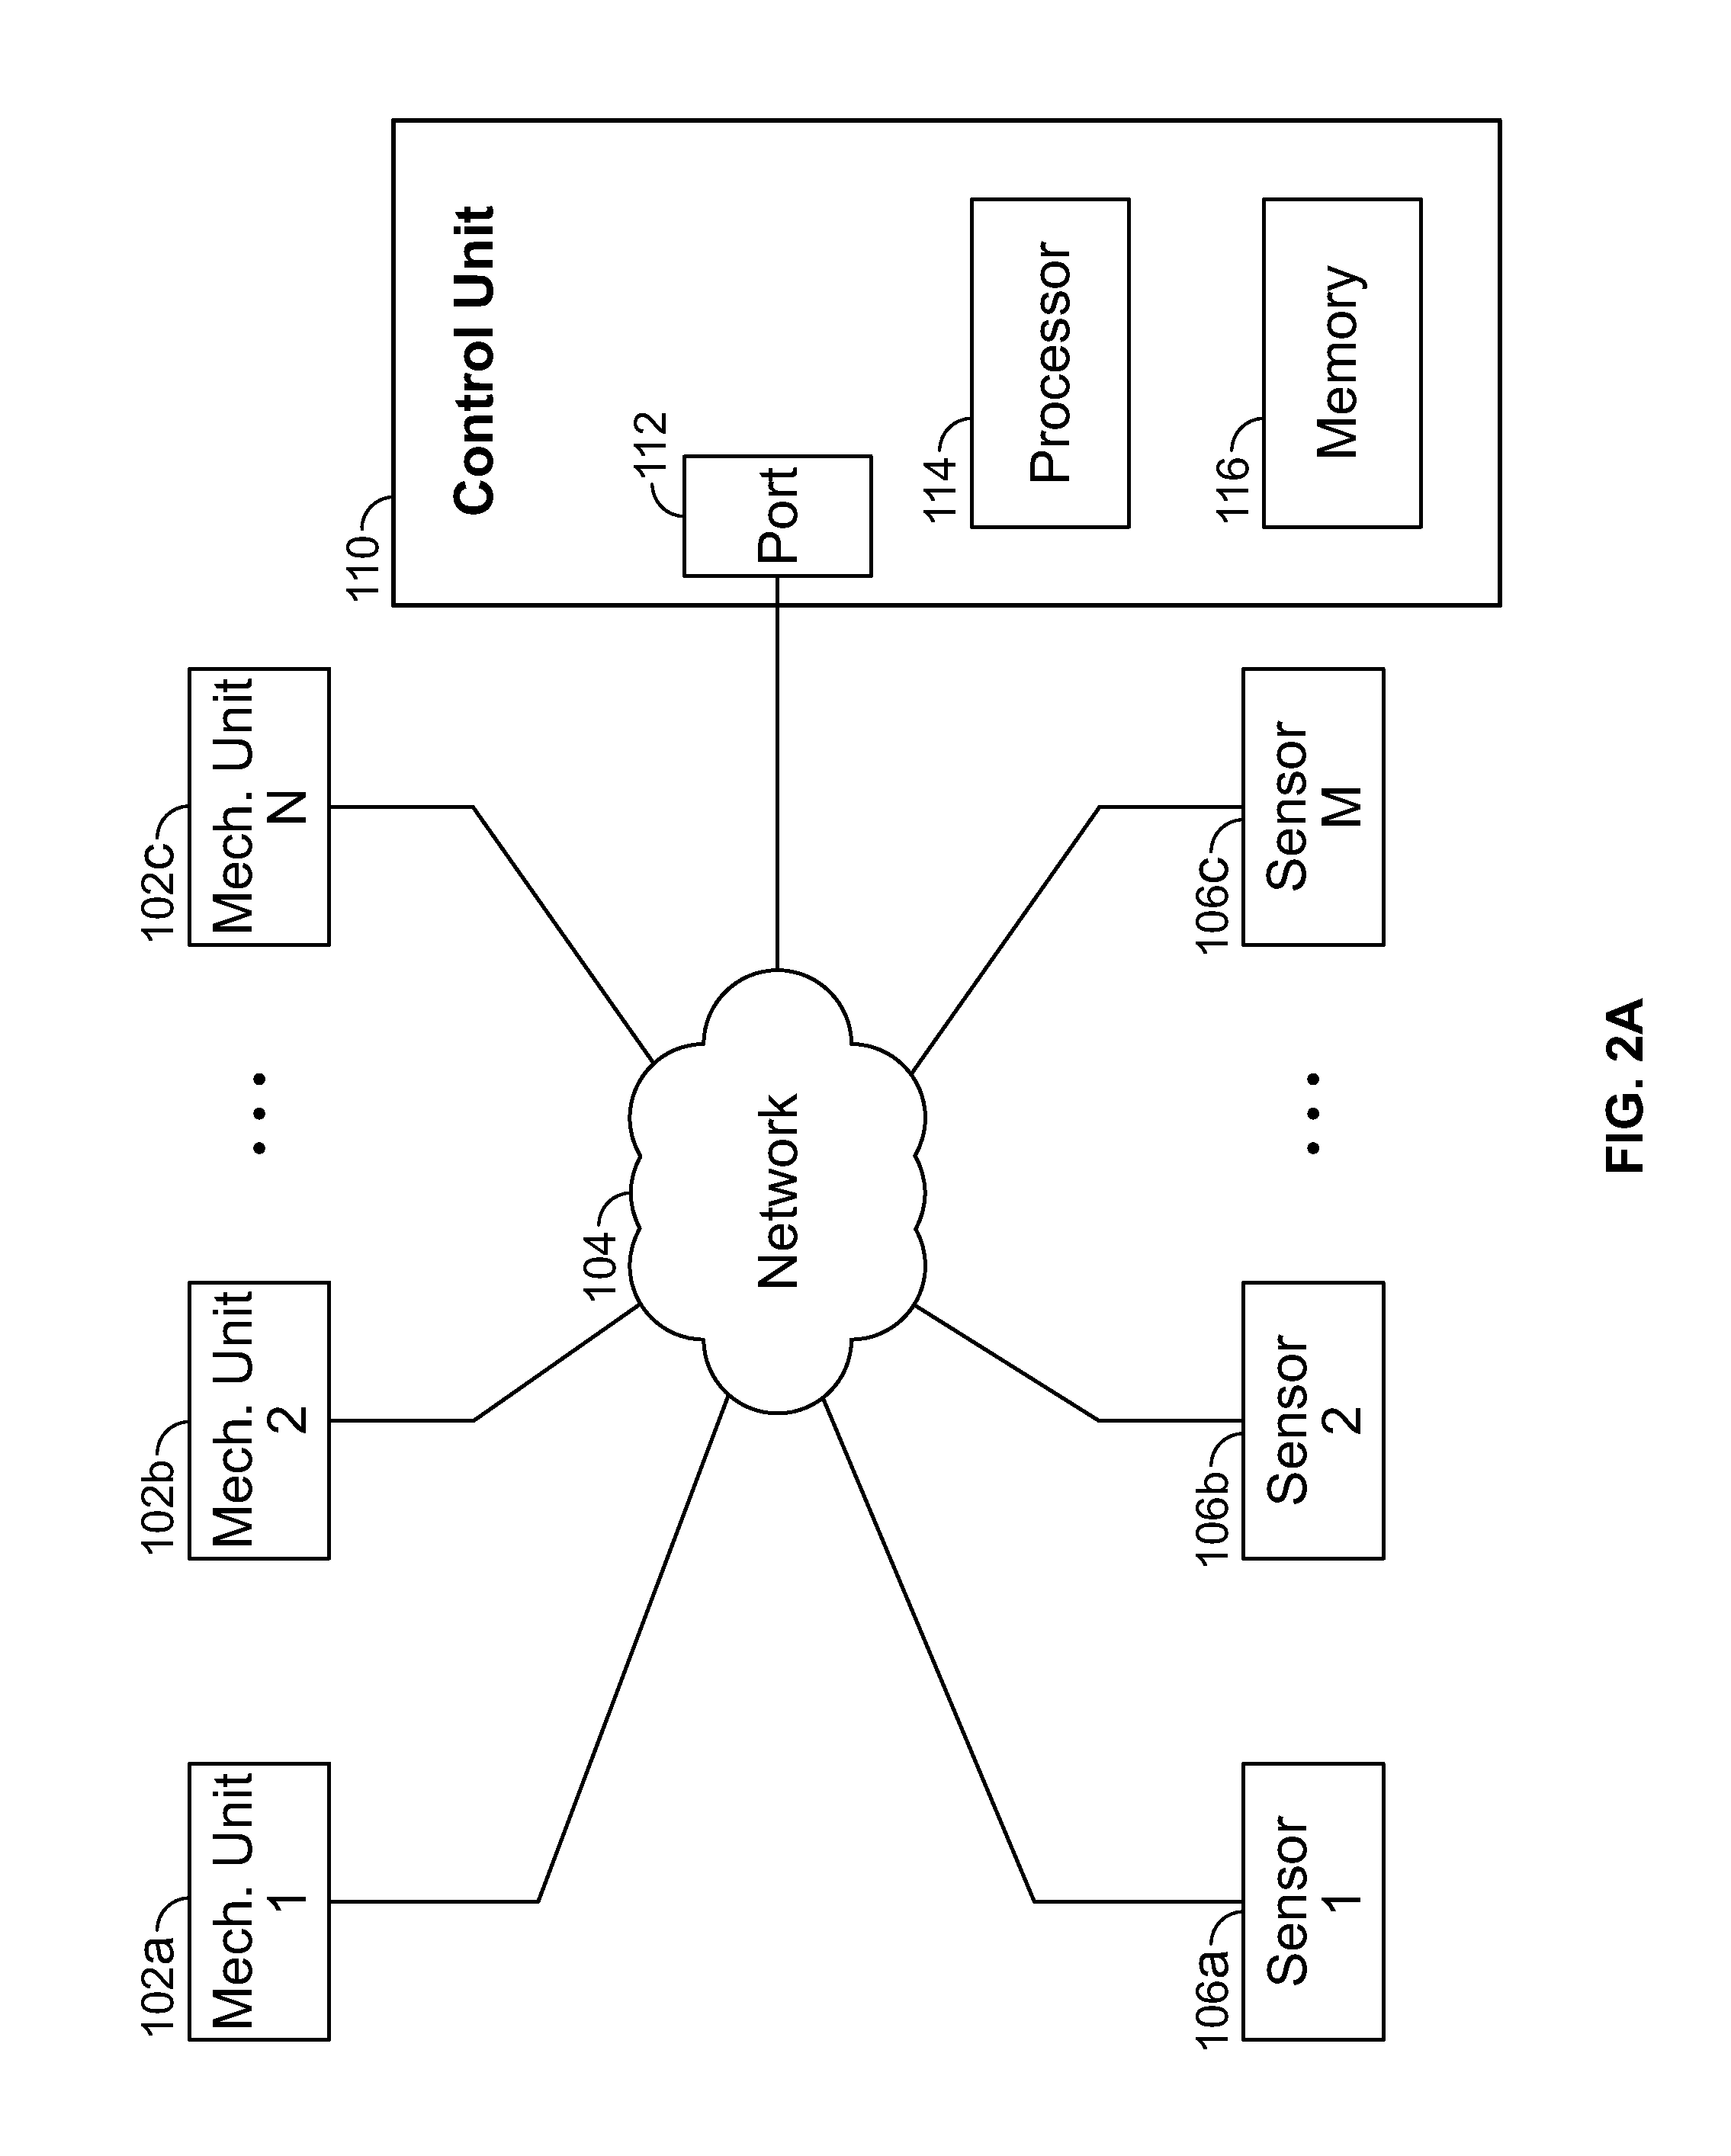 Method and system for controlling building energy use